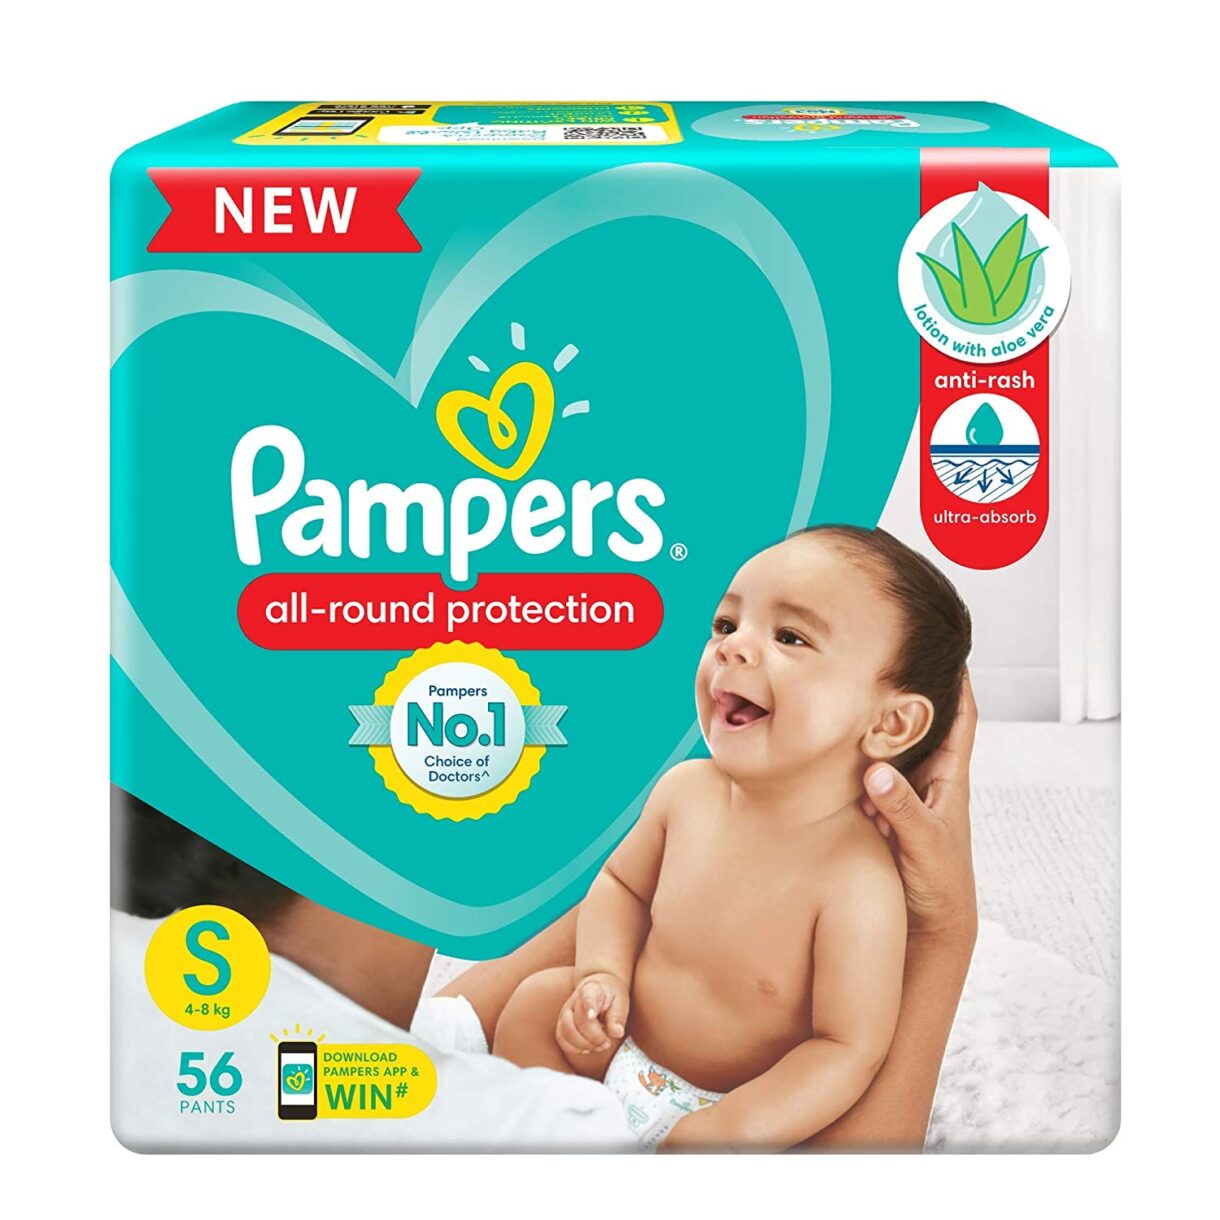 Pampers All round Protection Pants, Small size baby diapers (SM) 56 Count, Lotion with Aloe Vera